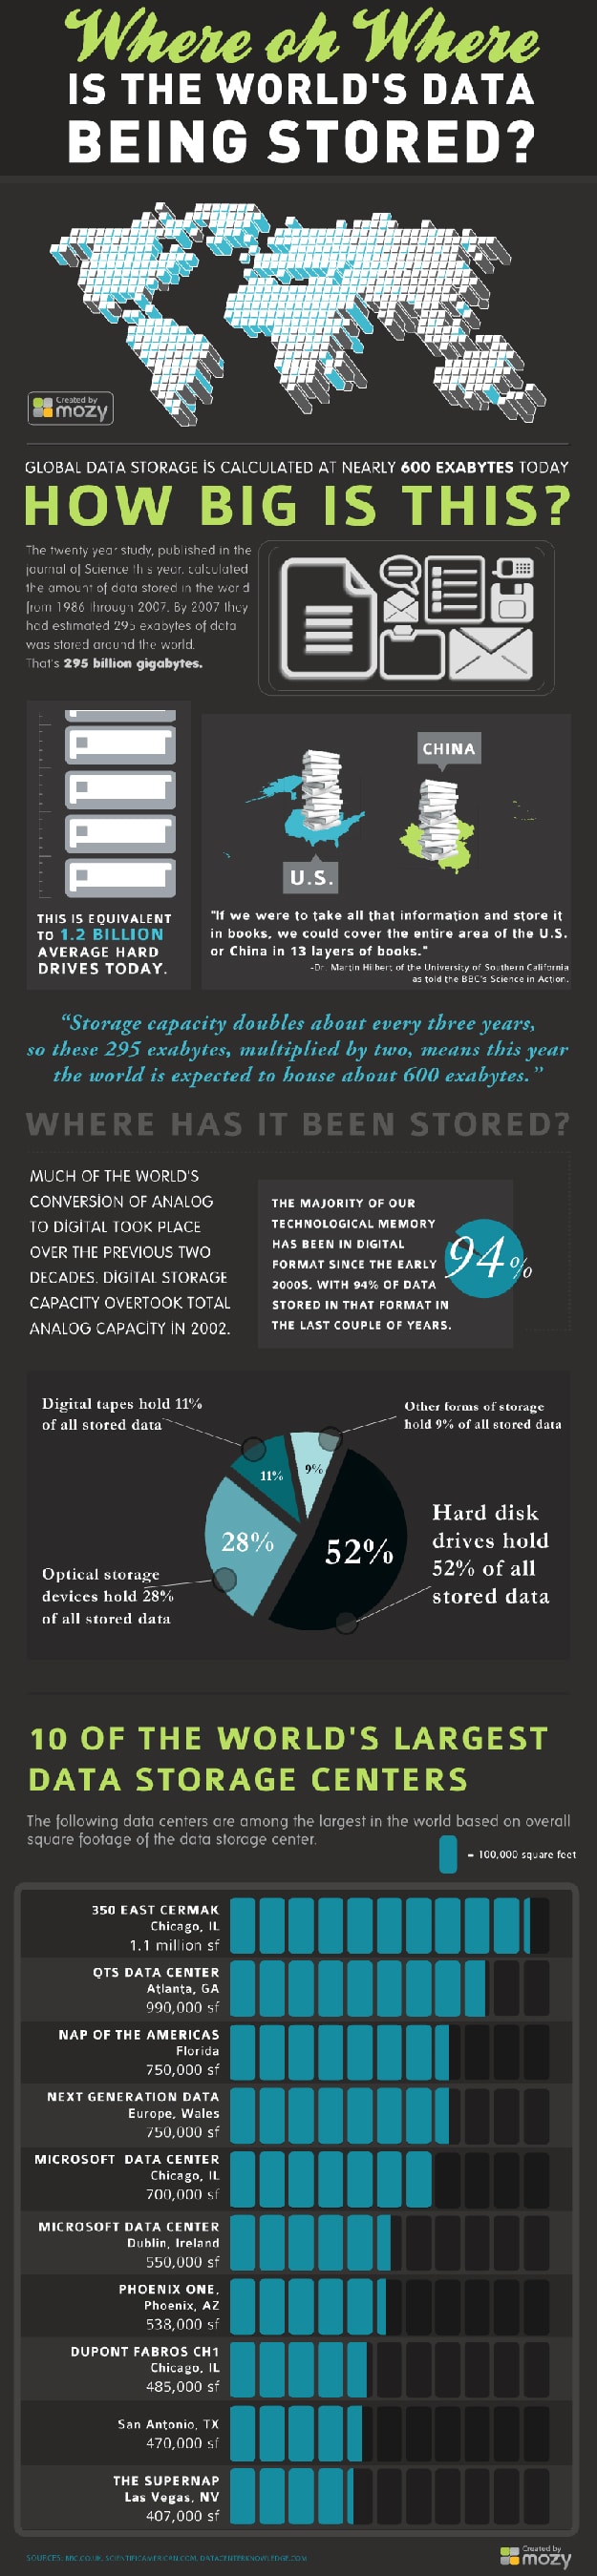 Global Data Storage: How Much & Where It Is [Infographic]